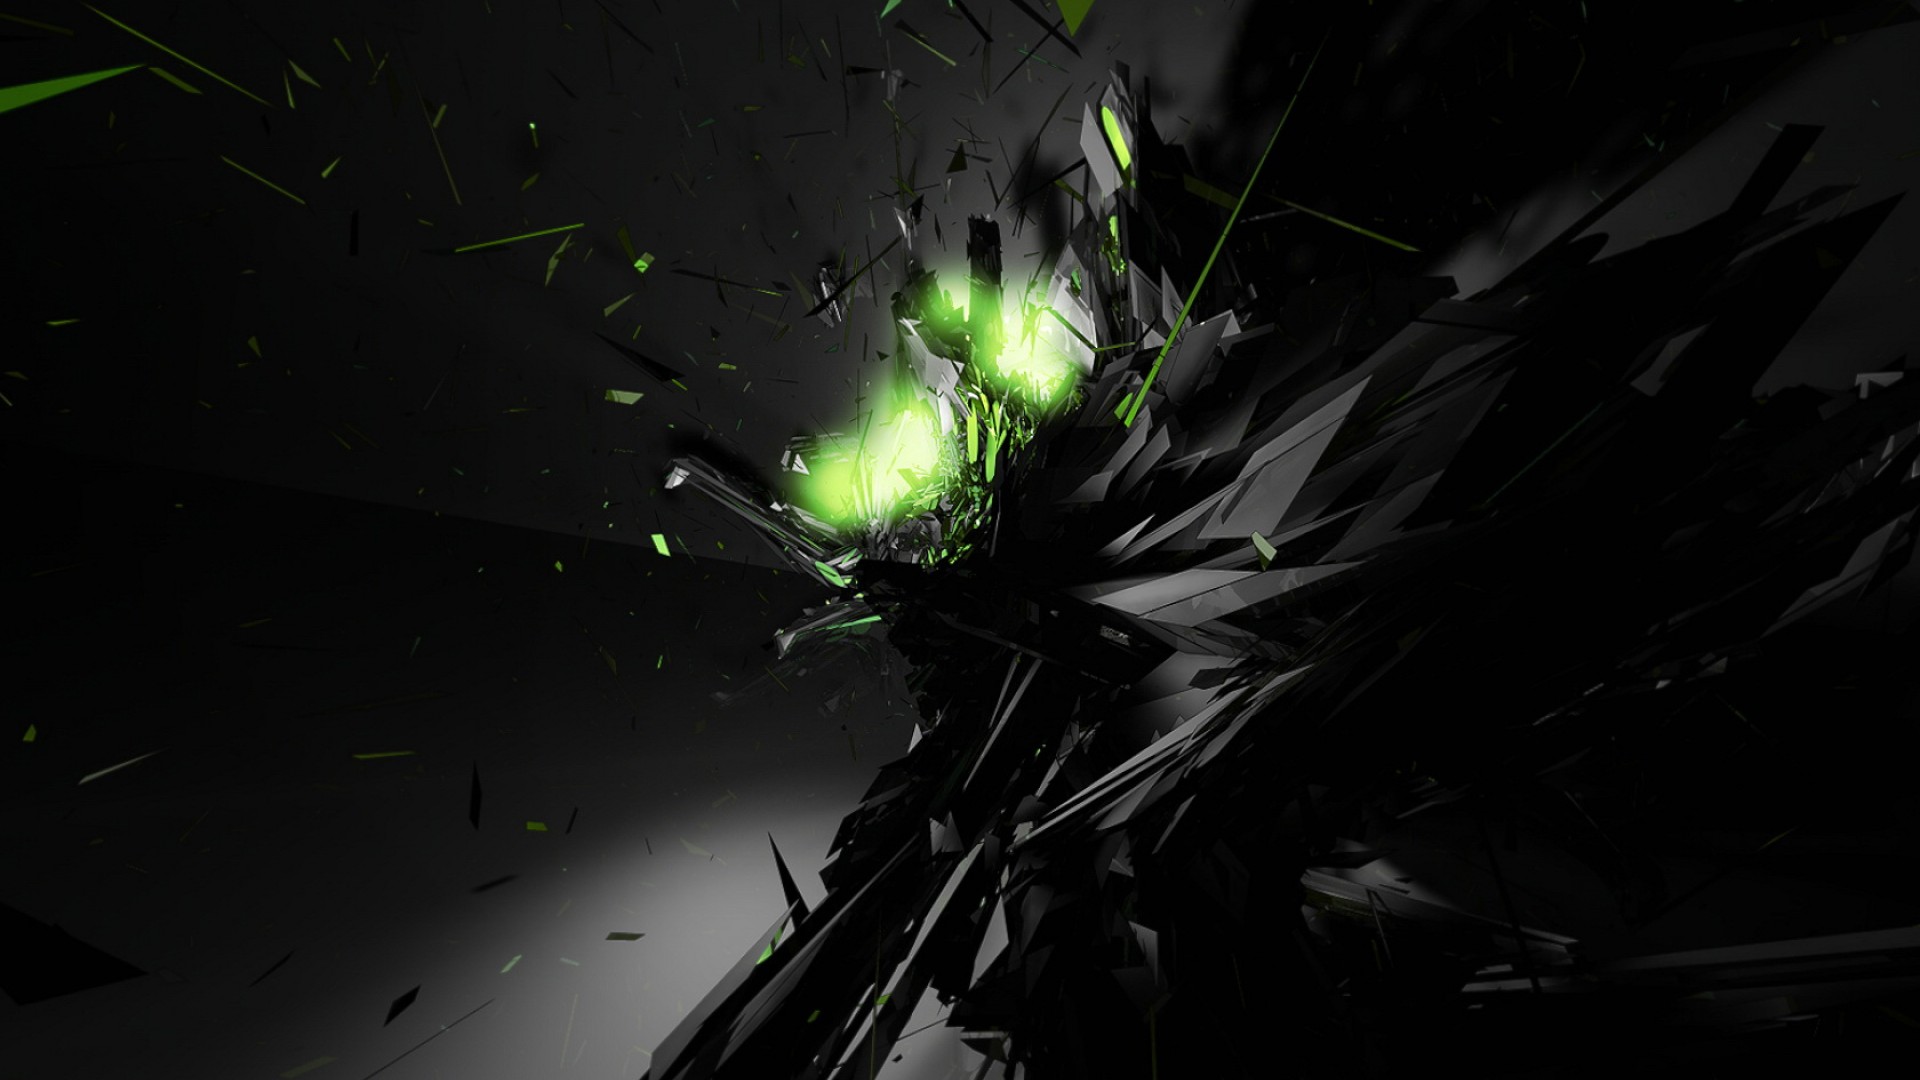 Abstract Green Glow Desktop Wallpaper And Make This For Your